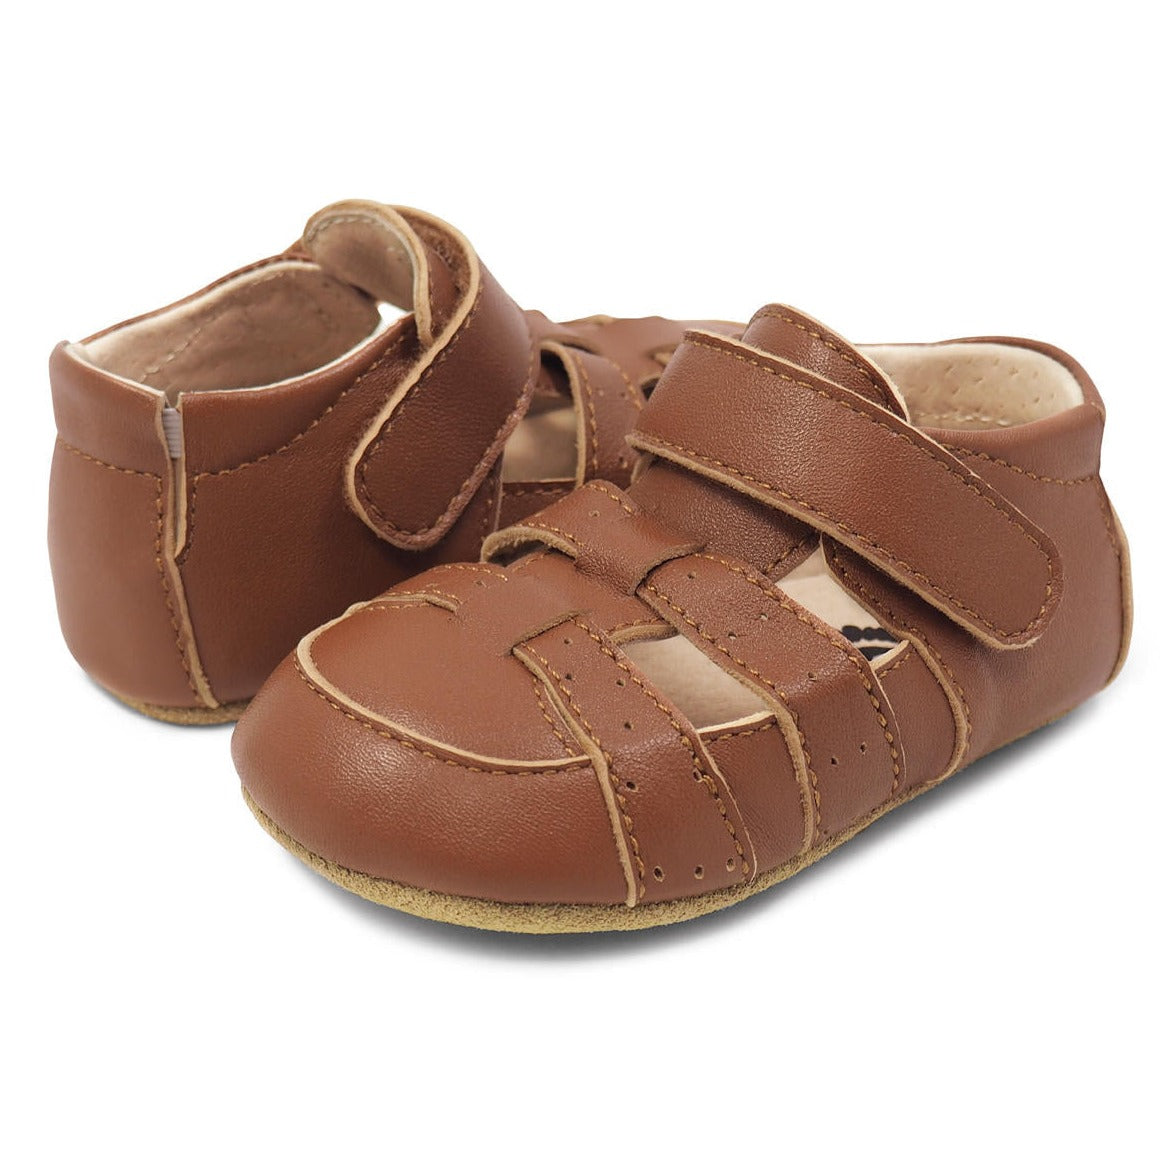 This cute dude is up-for-anything! Versatile and handsome, Andy is an everyday hit that will pair with any getup. This super soft leather baby boy’s shoe is easy to slip on with its wide opening with plenty of protection once that little foot is inside.